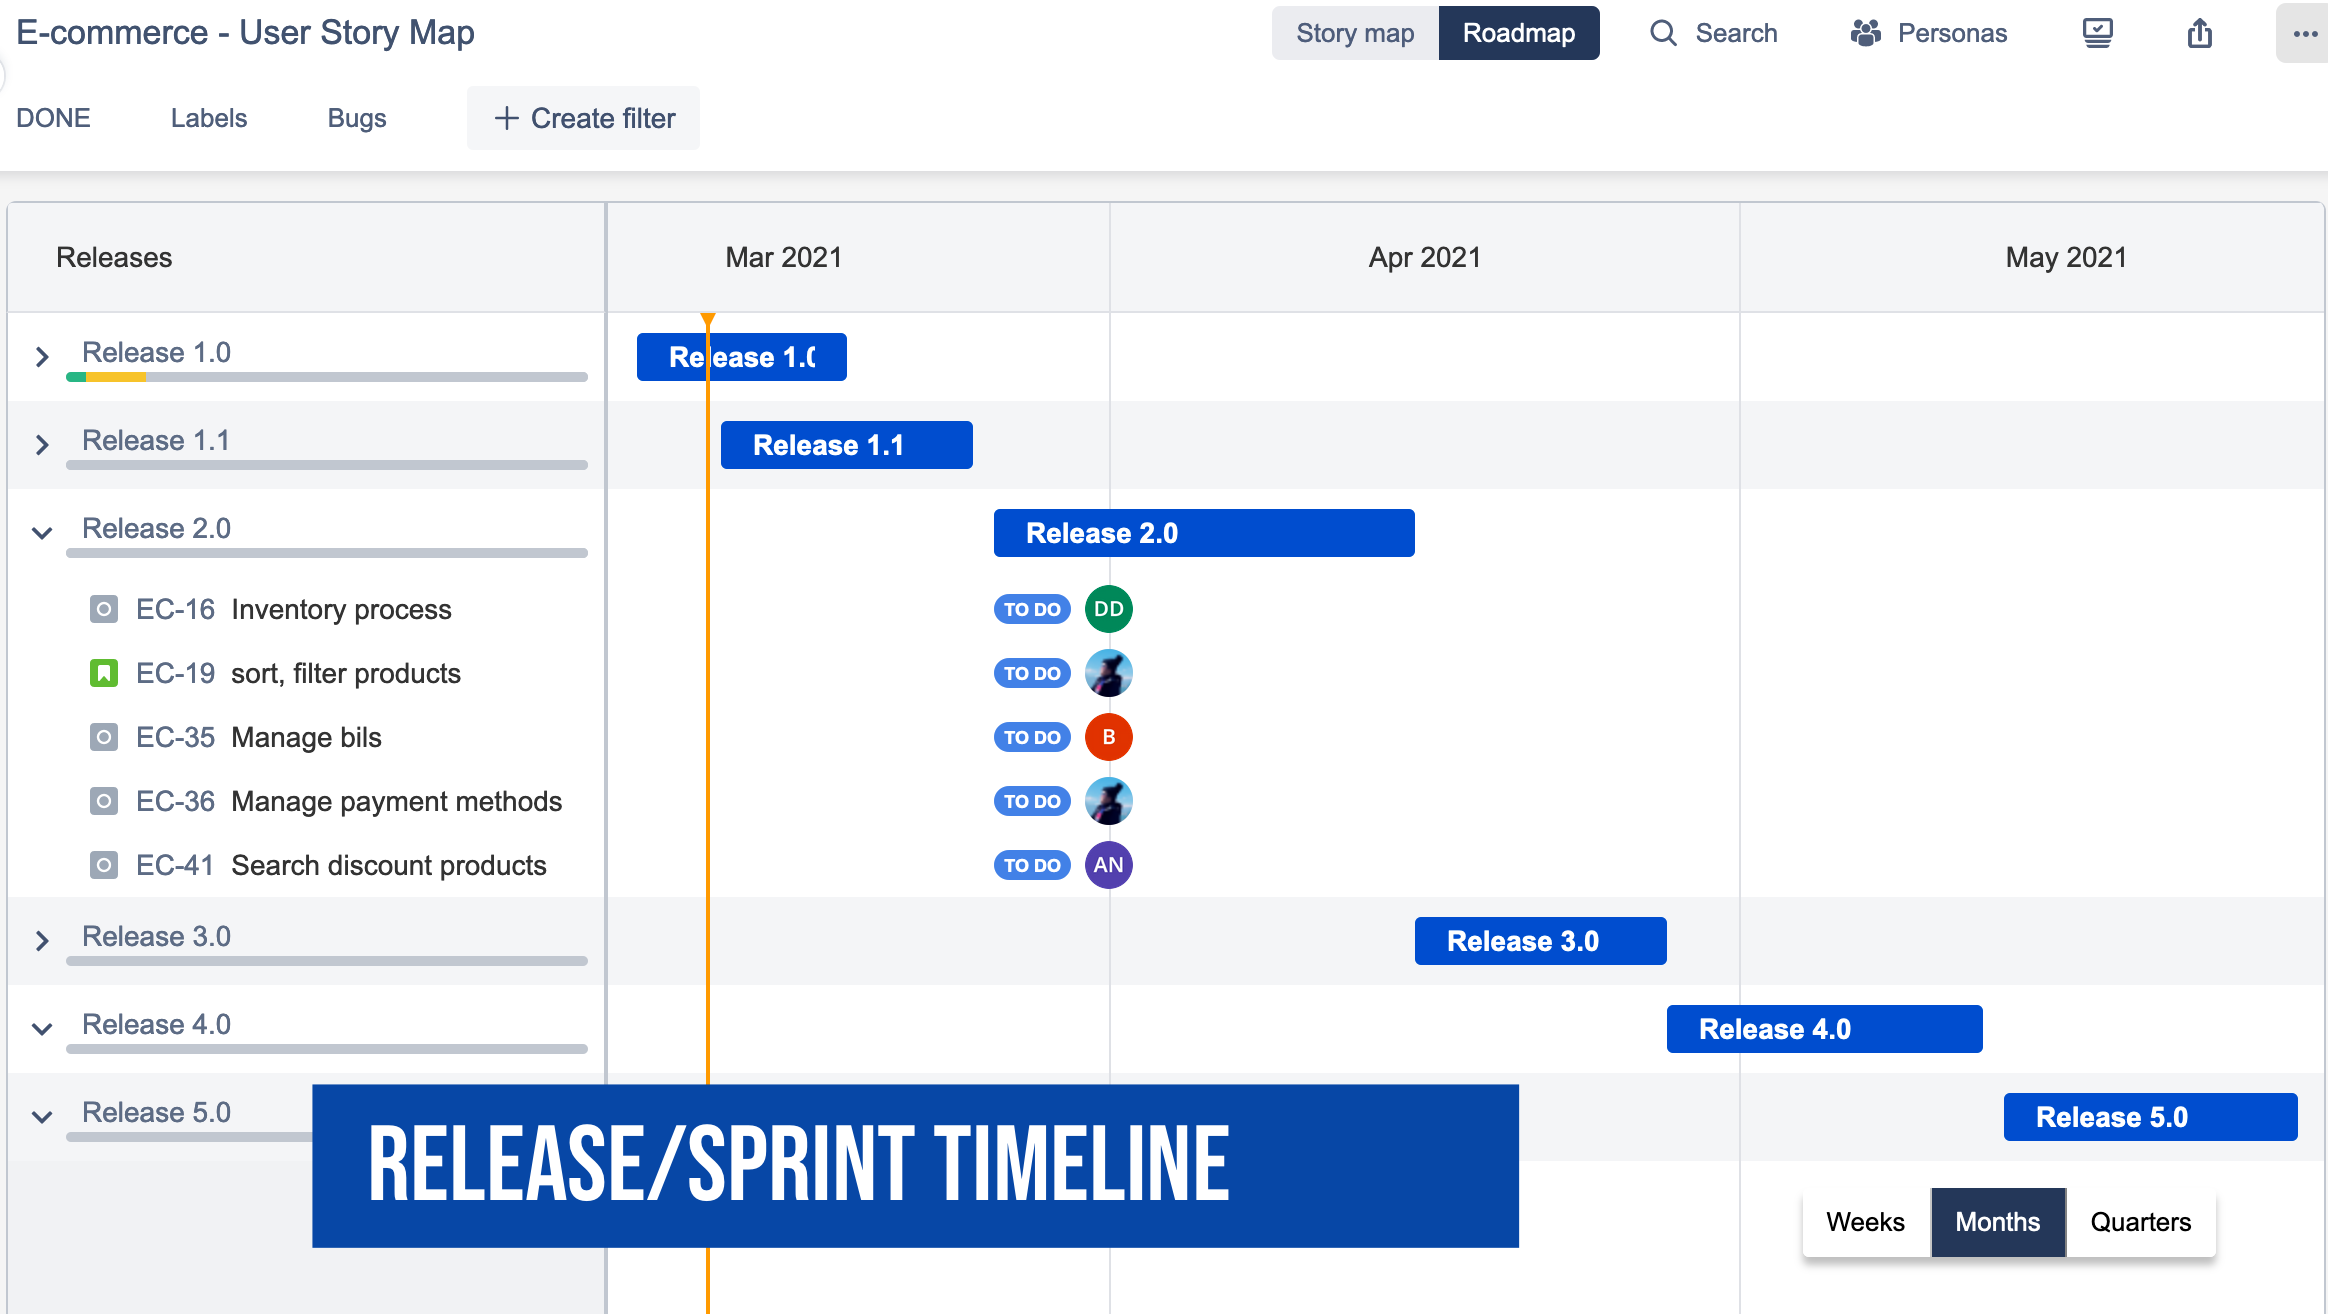 agile-user-story-map-for-jira-cloud-1-3-12-ac-release-user-story-map